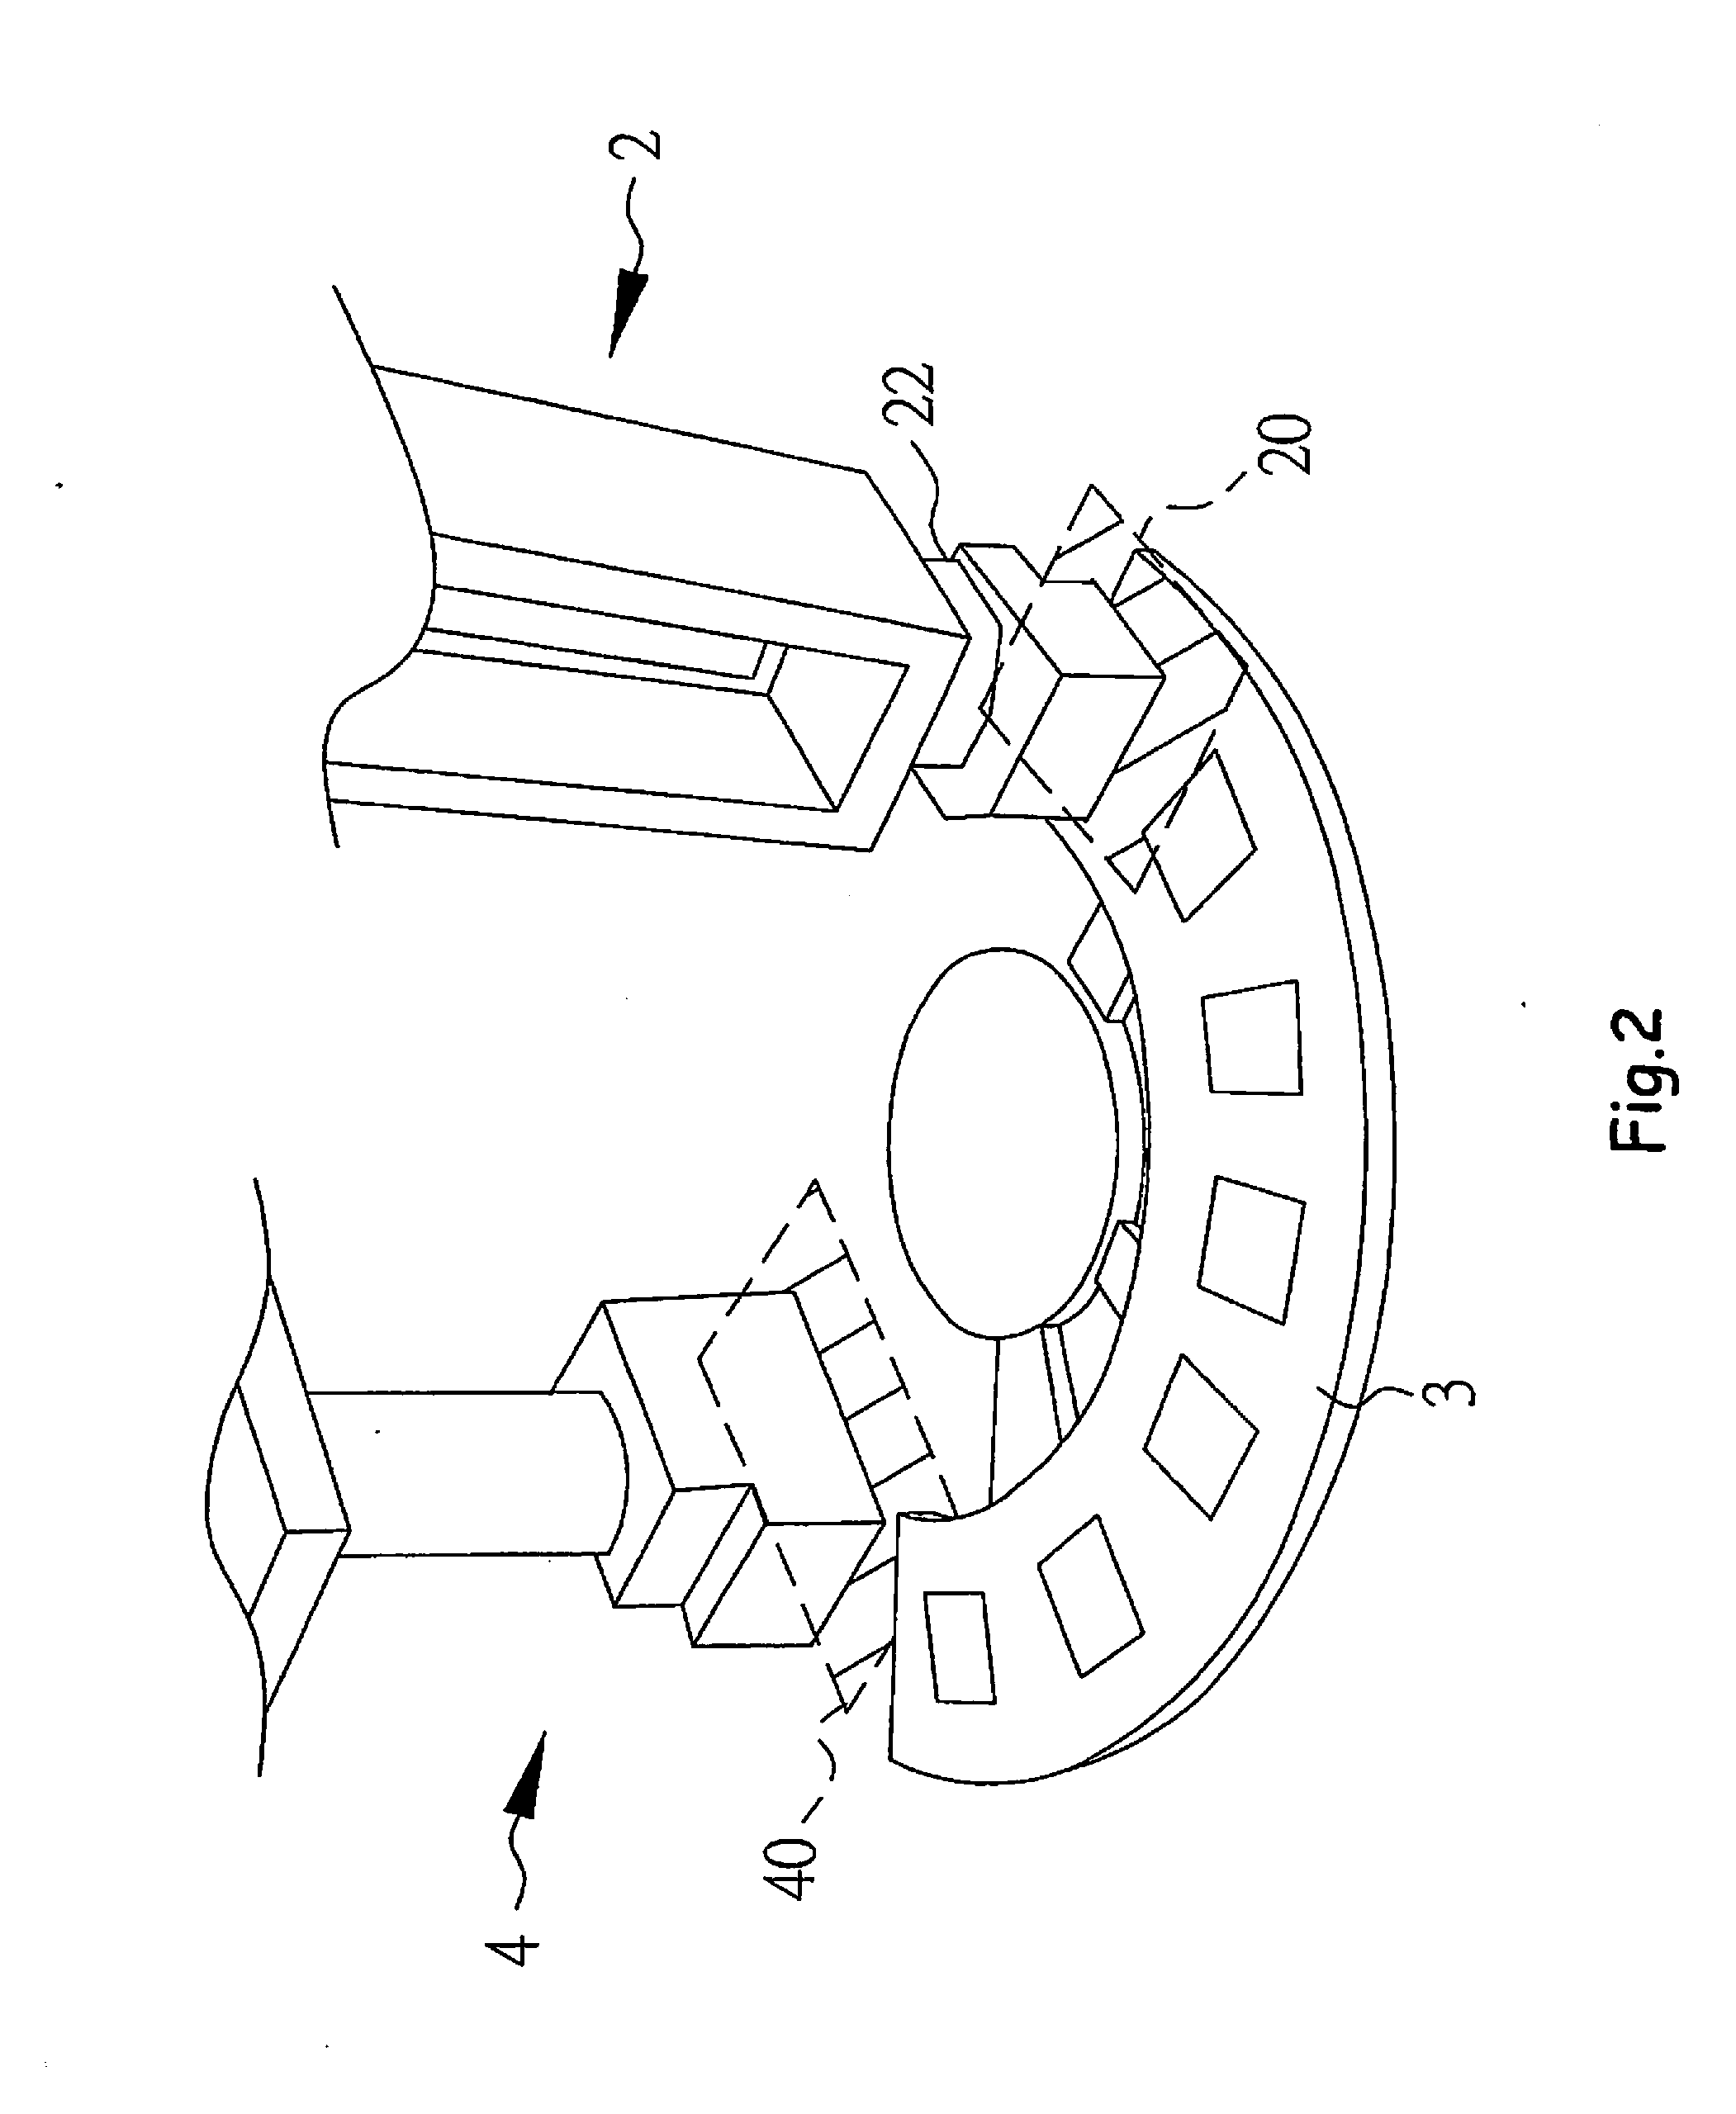 Test Apparatus with Sector Conveyance Device